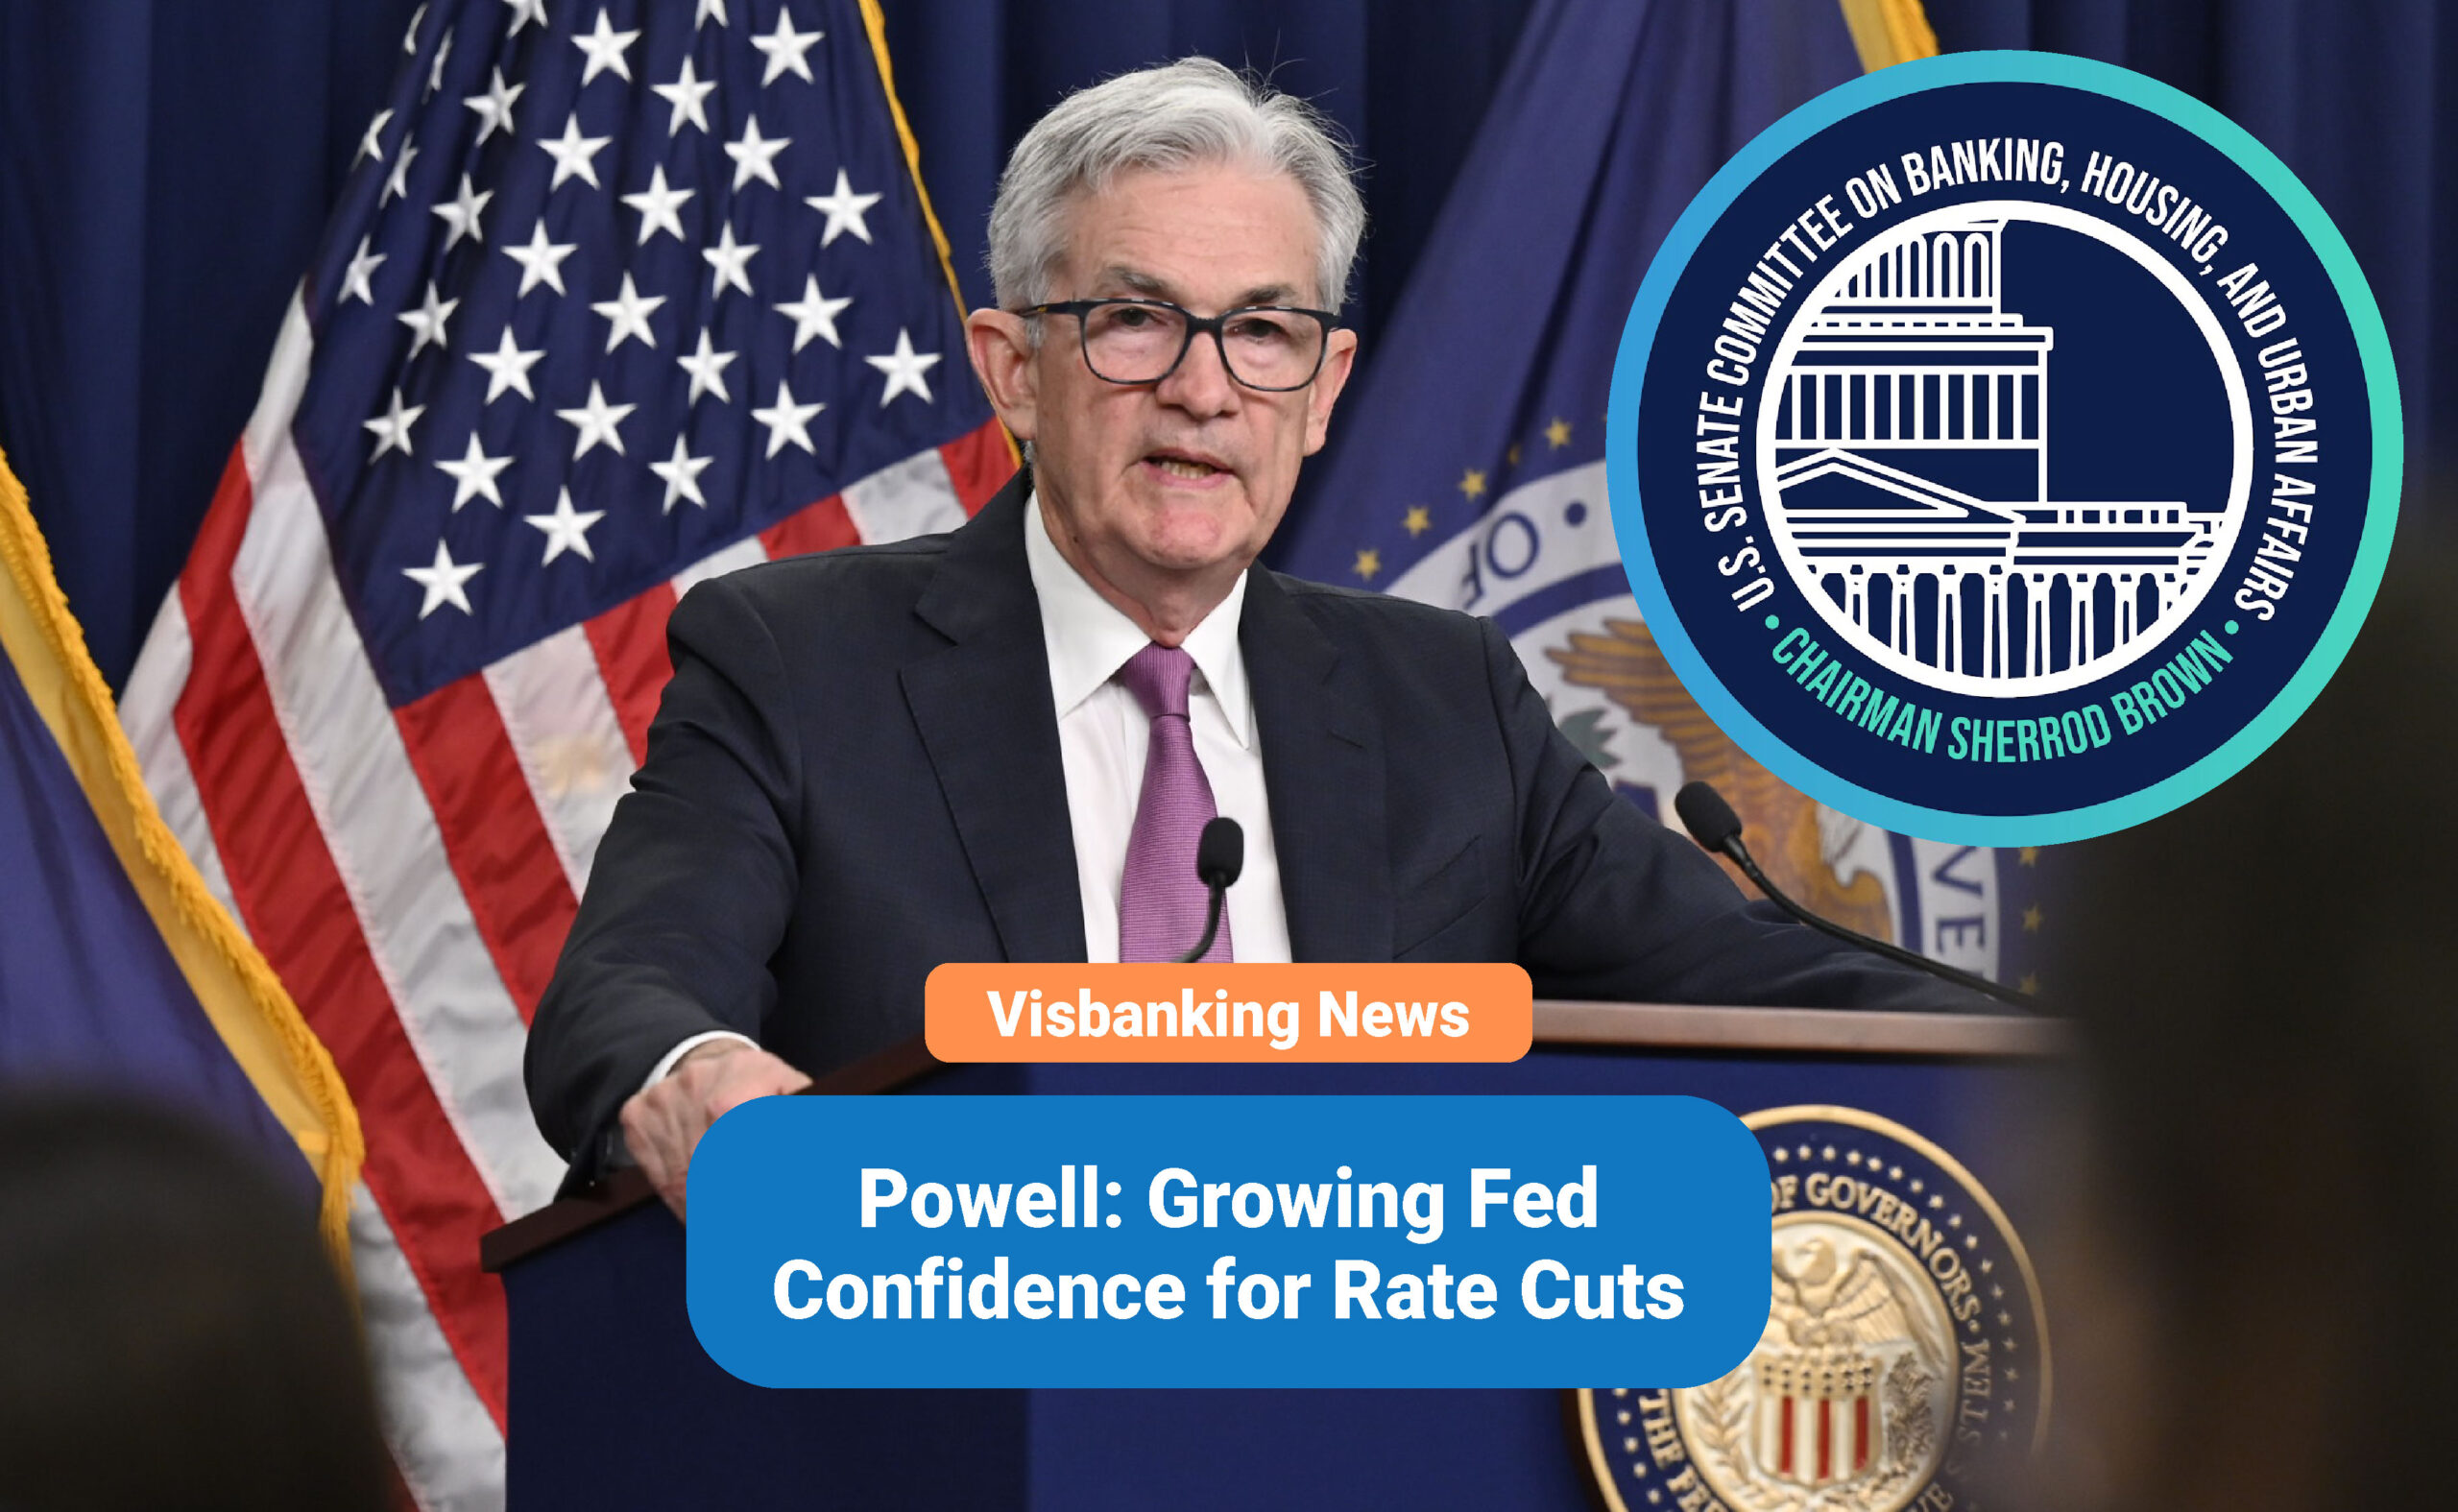 Powell: Growing Fed Confidence for Rate Cuts